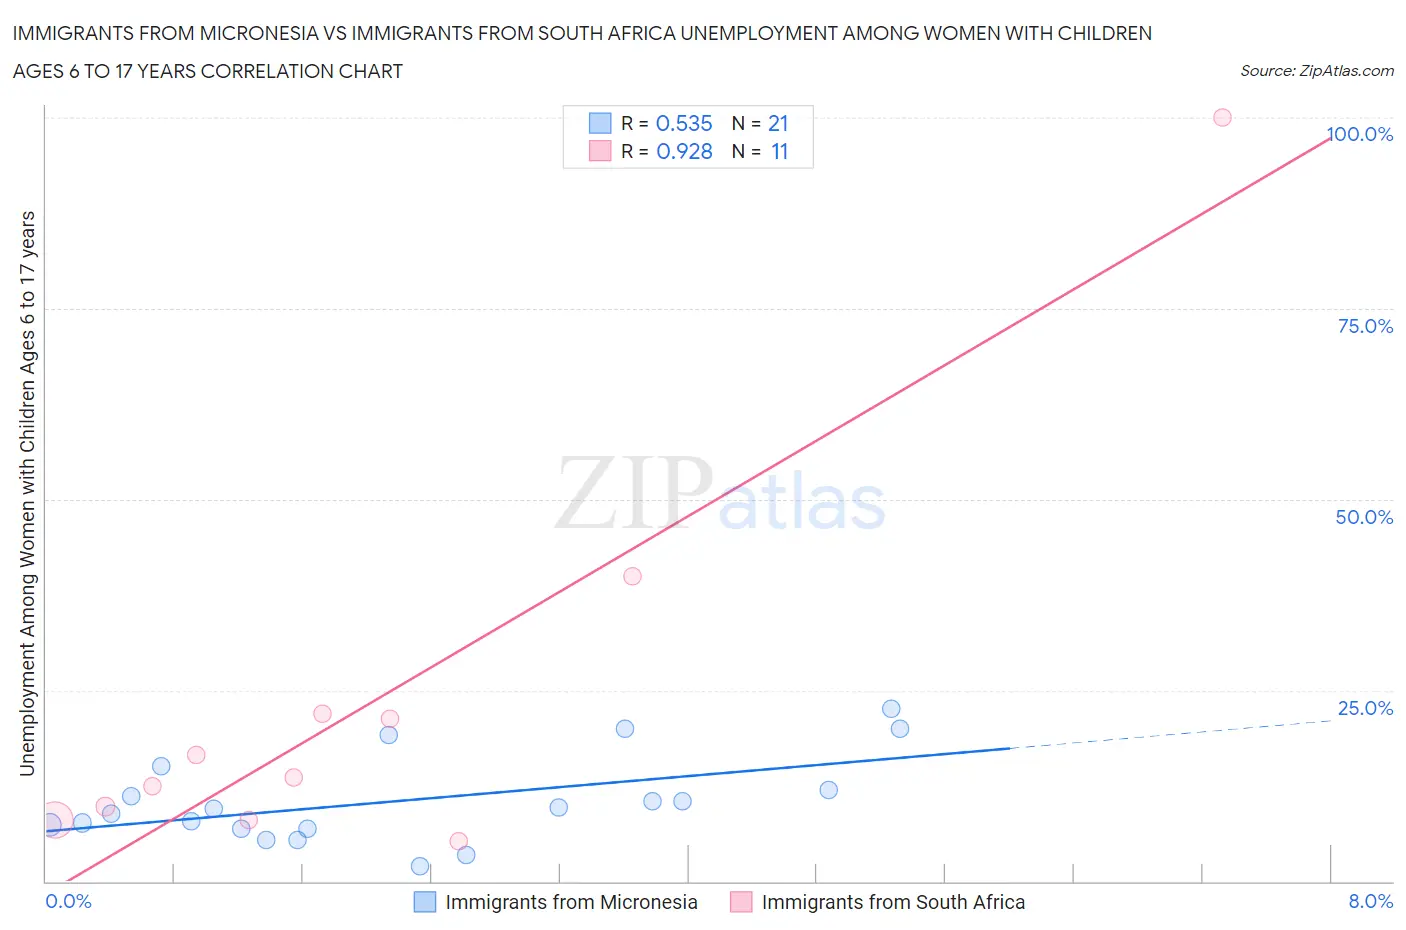 Immigrants from Micronesia vs Immigrants from South Africa Unemployment Among Women with Children Ages 6 to 17 years